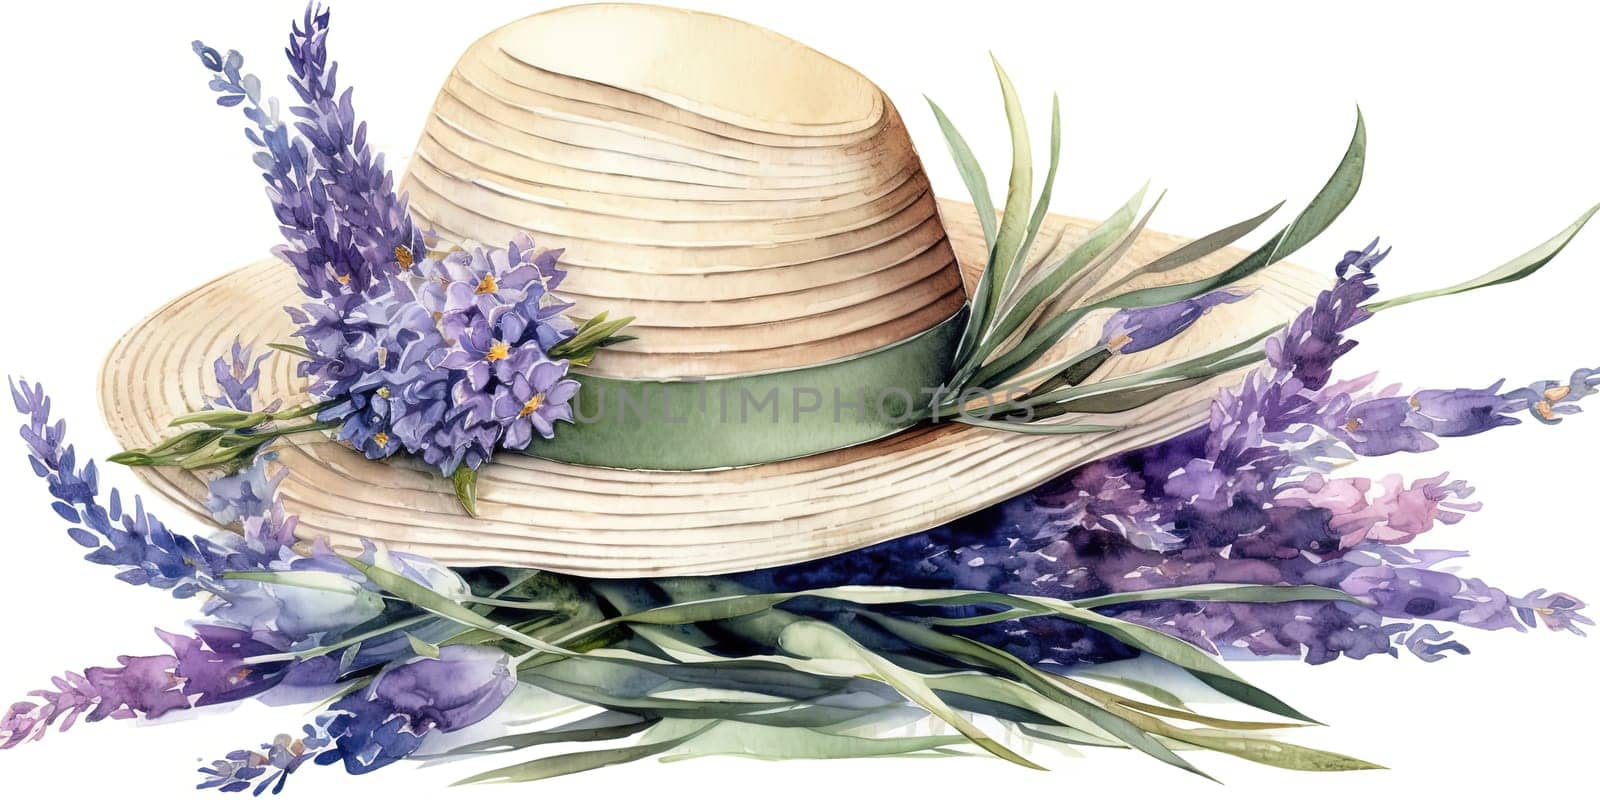 Watercolor Illustration Of Straw Hat With Lavender Banches by GekaSkr